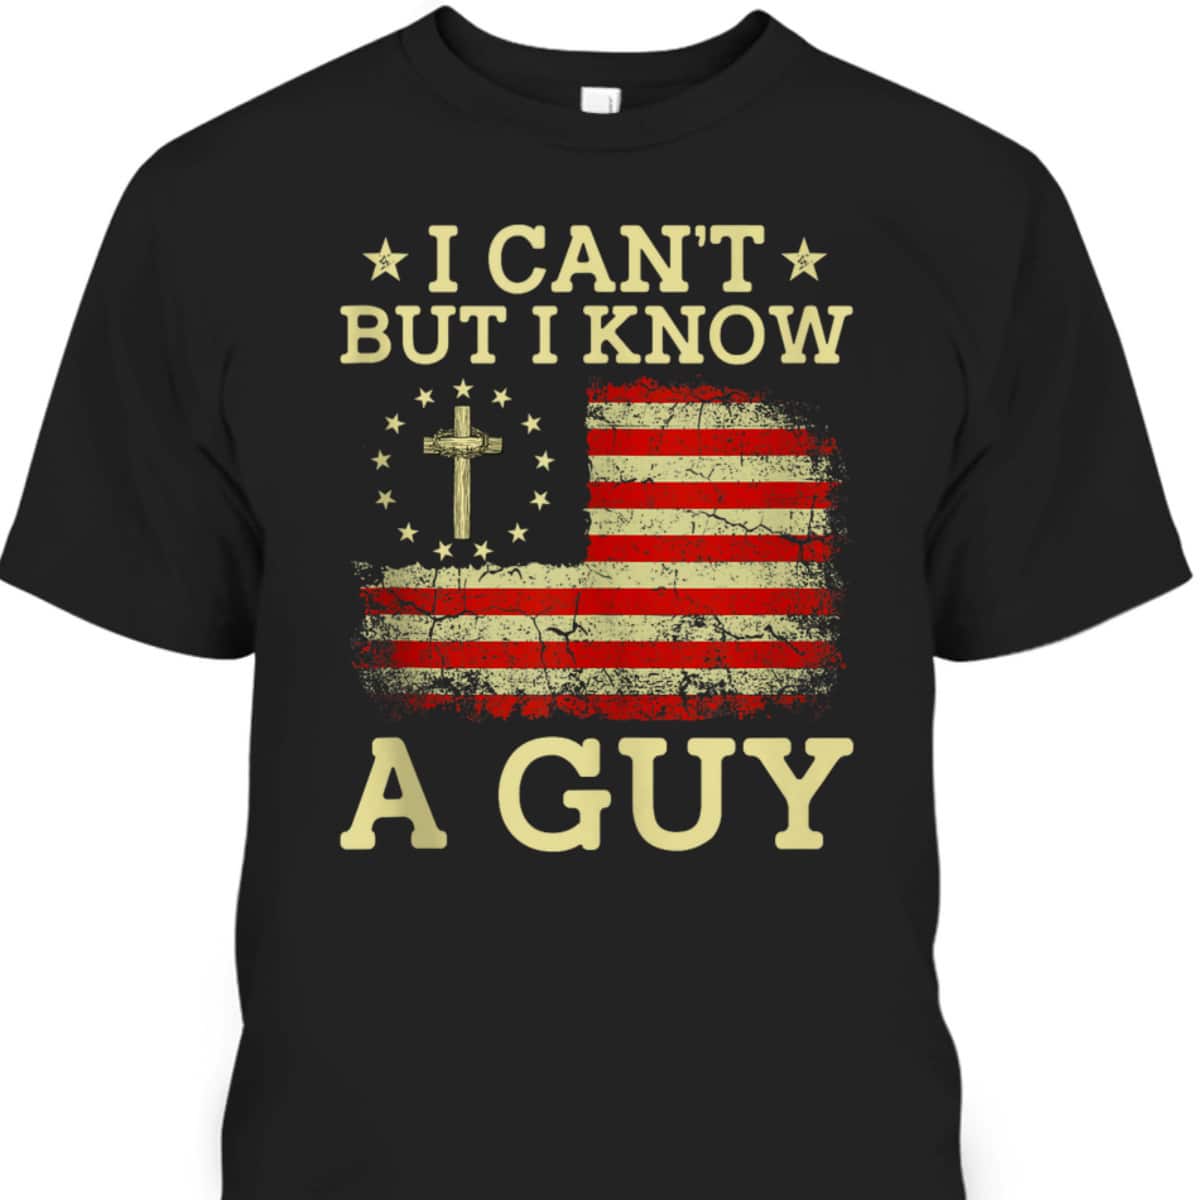 I Can't But I Know A Guy Funny Jesus Christian Cross US Flag T-Shirt